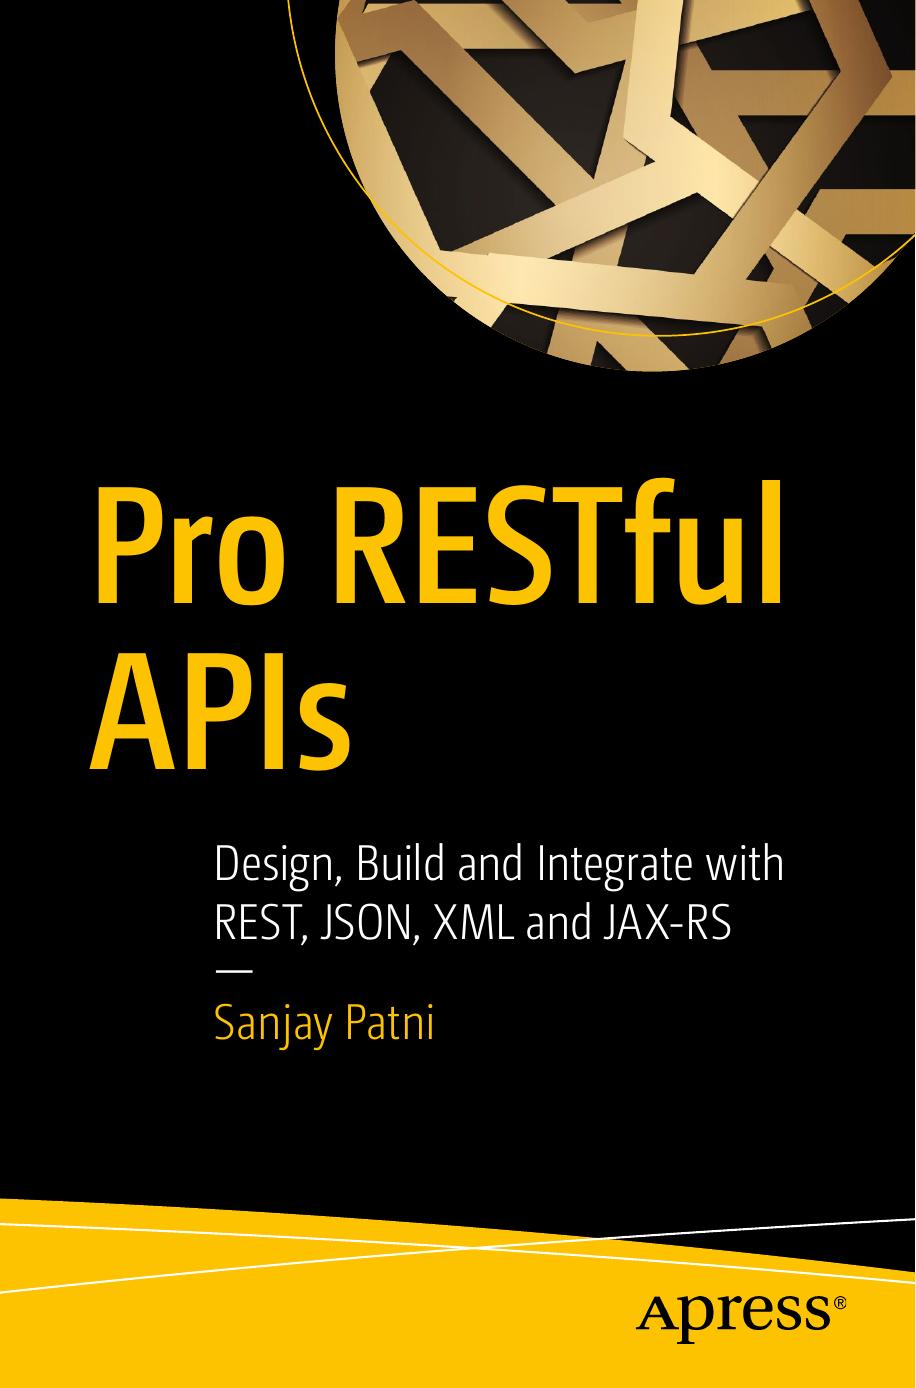 Pro RESTful APIs: Design, Build and Integrate With REST, JSON, XML and JAX-RS